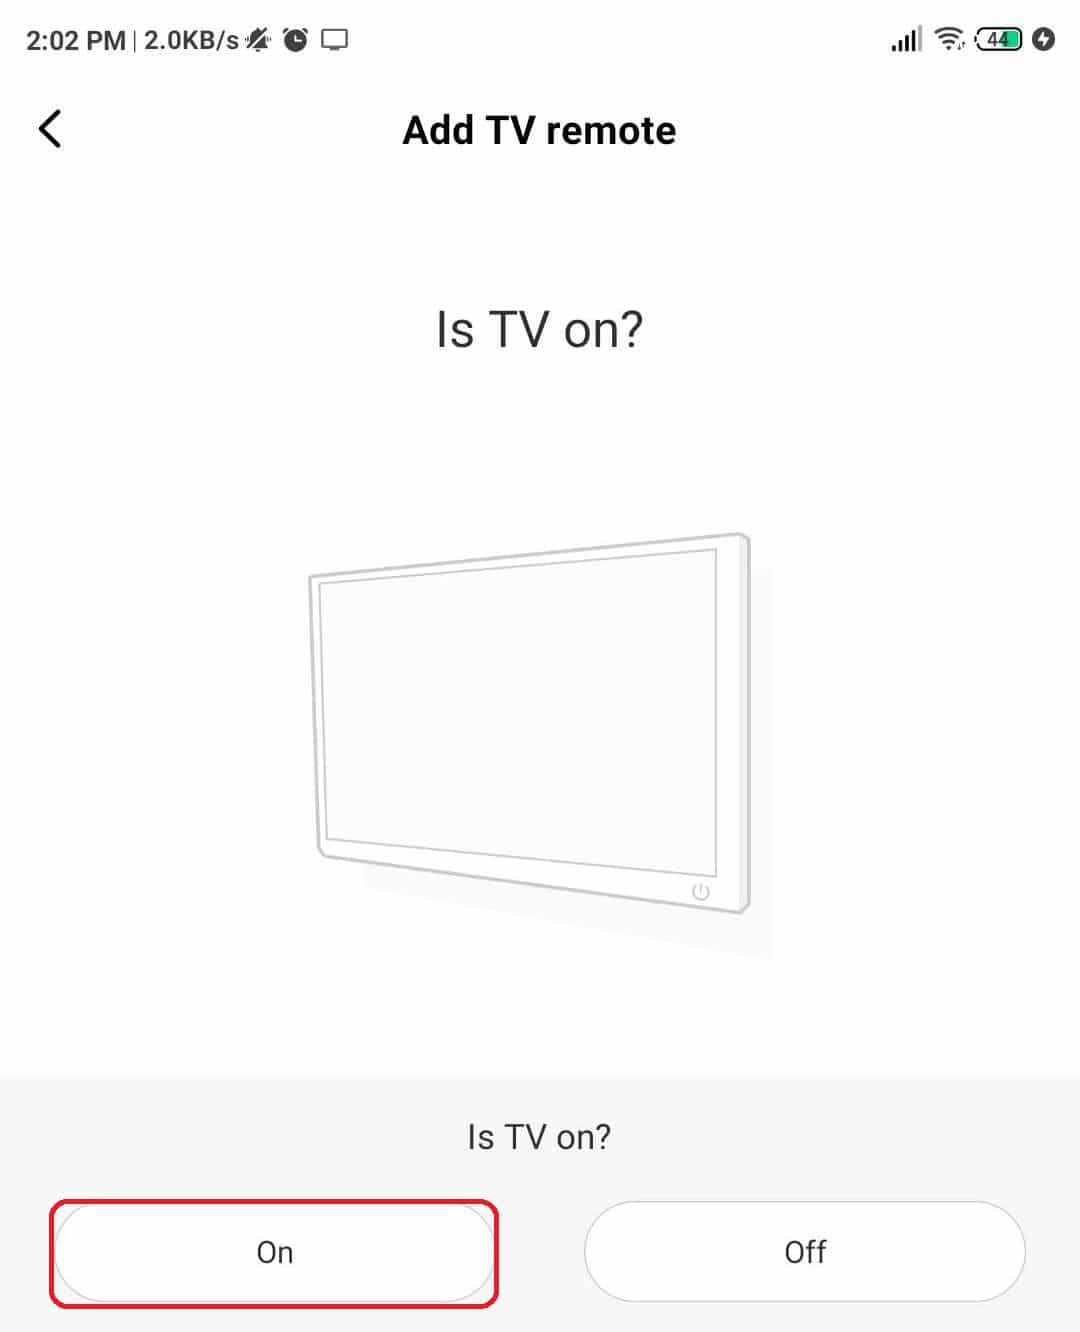 Setup to Pair remote with TV